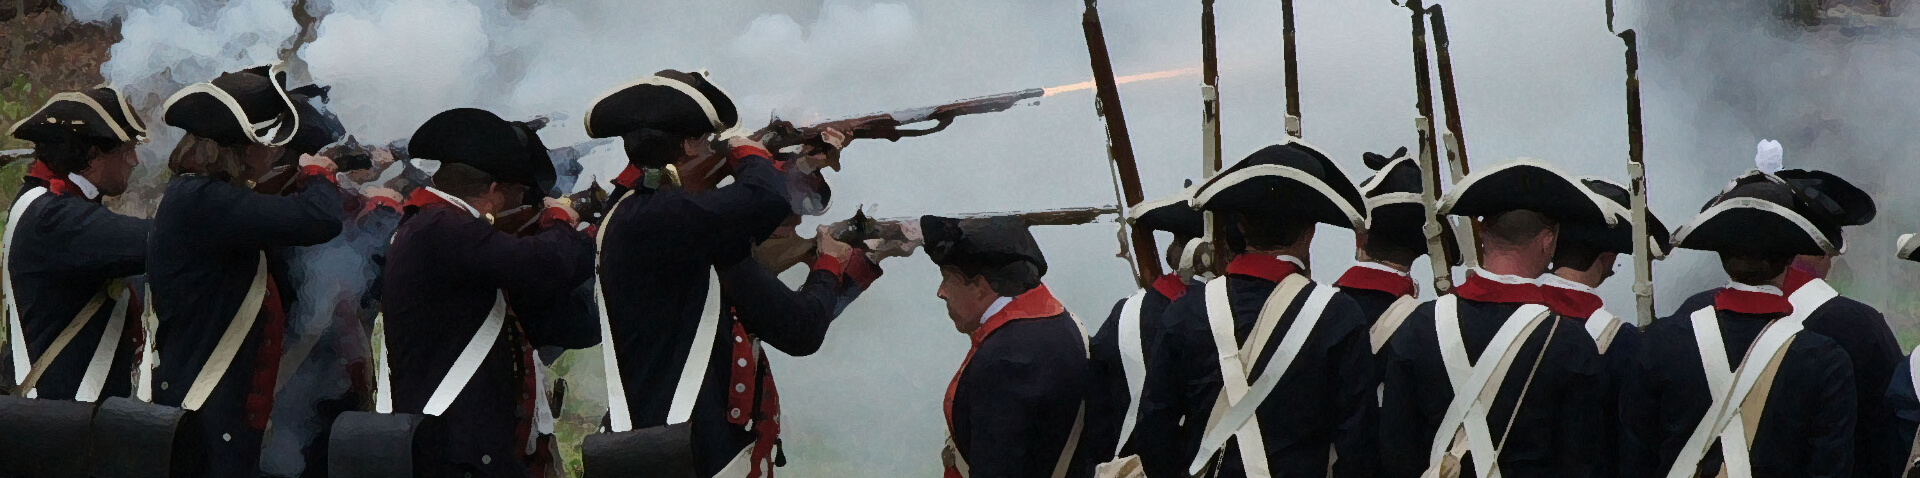 actor's shooting guns for the reenactment